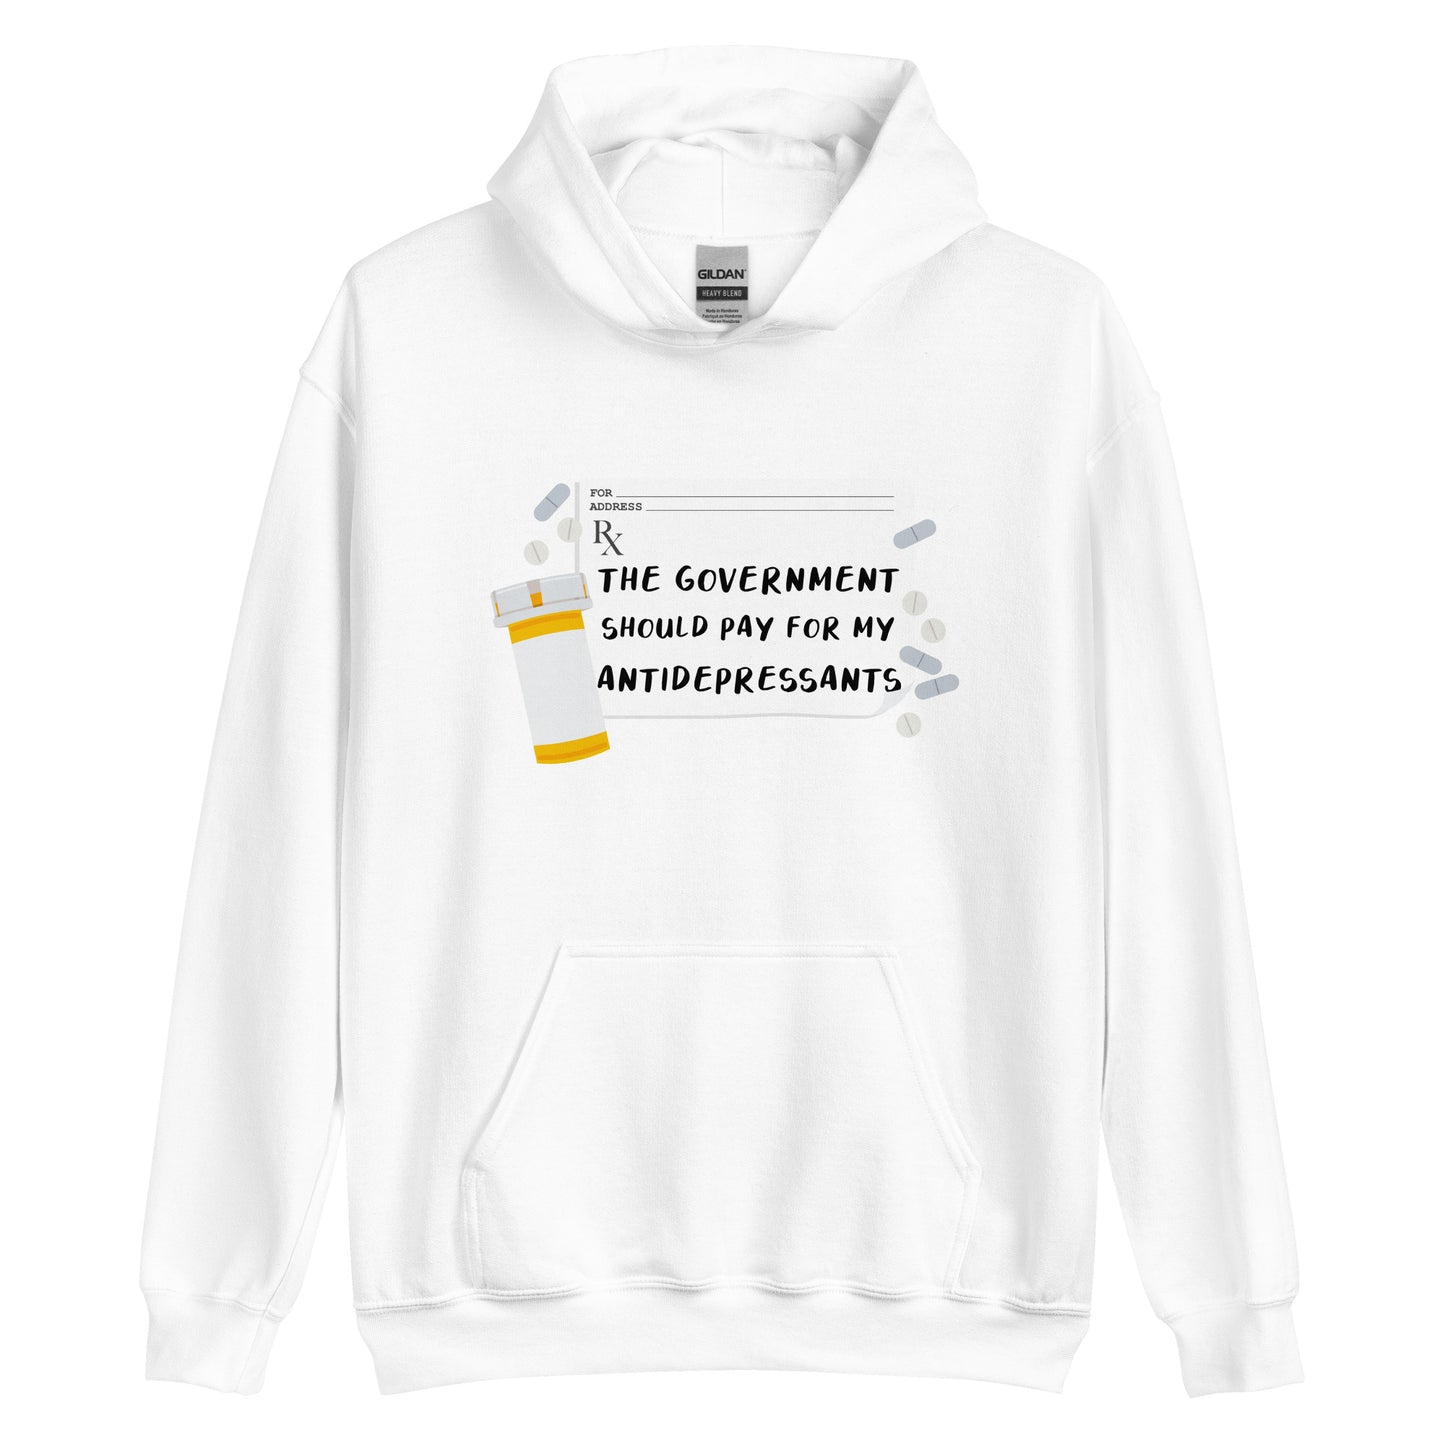 The Government Should Pay For My Antidepressants Hoodie